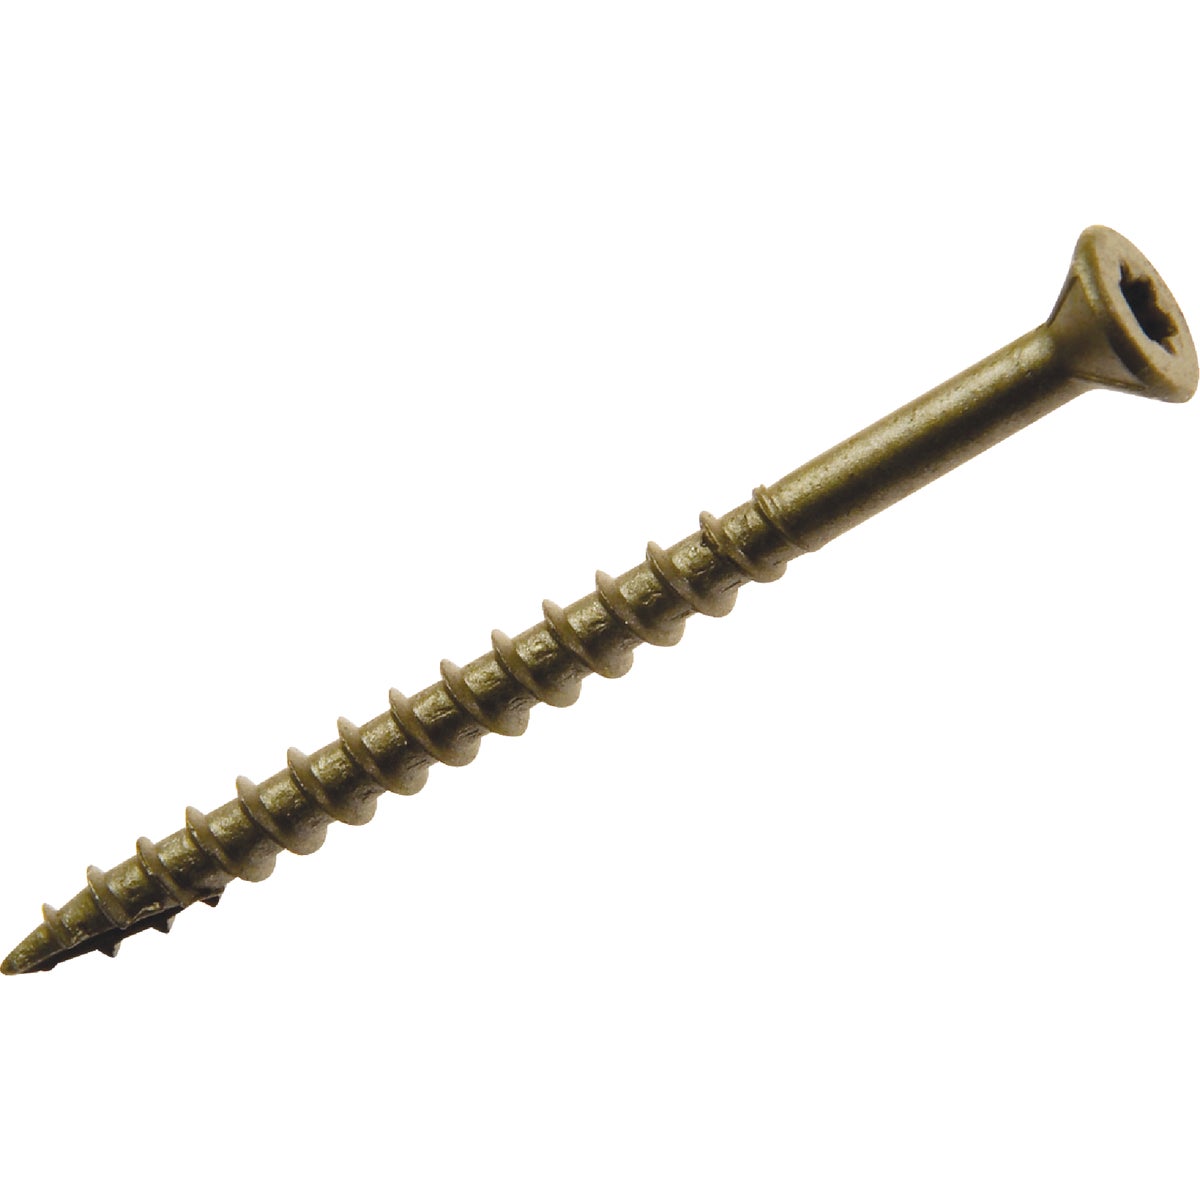 Item 758390, Gold exterior screw - 6-lobed, star drive provides quick bit engagement and